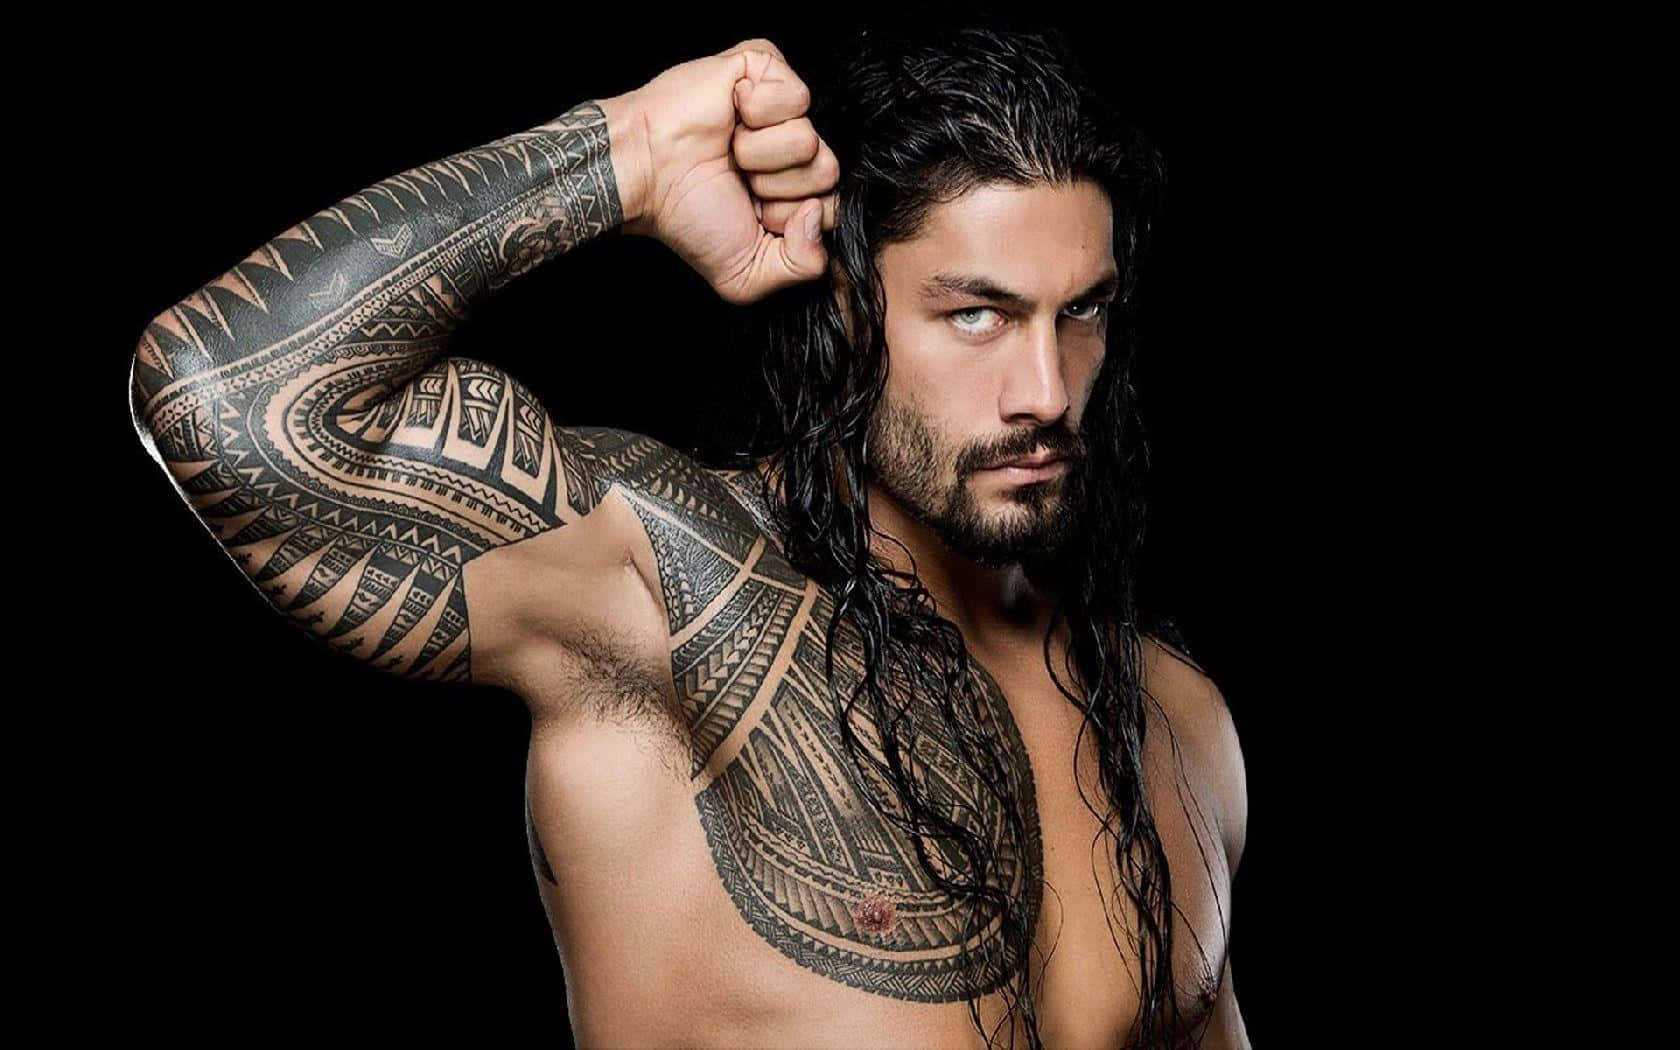 Wwe Wrestler With Tattoos Posing With His Arms Raised